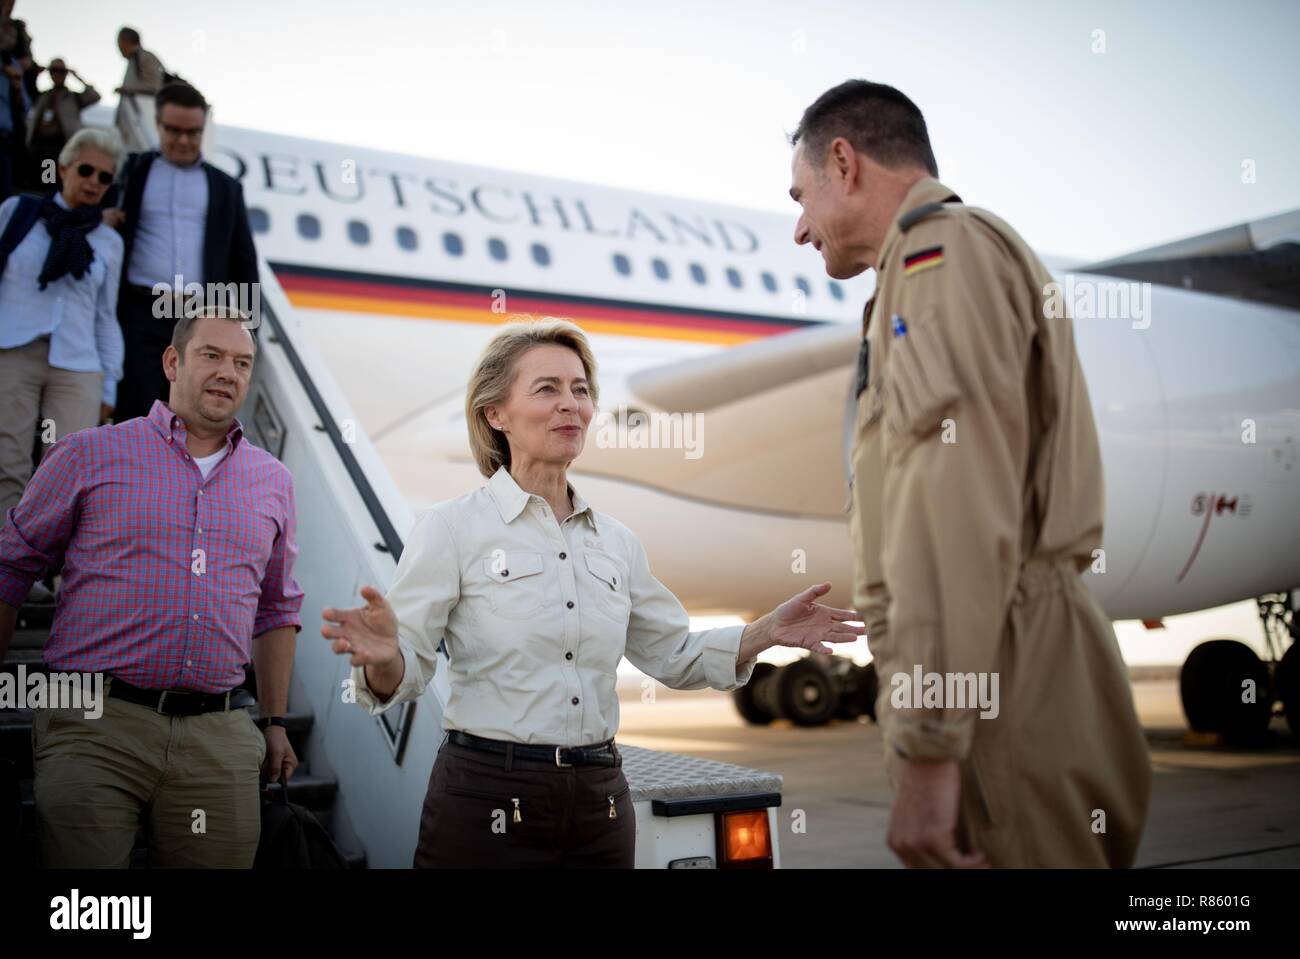 15 September 2018, Germany, Azraq: Ursula von der Leyen (CDU), Federal Minister of Defence, arrives at the air base in Al Azraq in Jordan and is welcomed by Kristof Conrath (R), contingent leader of the German contingent. In the background Henning Otte (3-L, CDU member of the Bundestag), Marie-Agnes Strack-Zimmermann (FDP member of the Bundestag) and Tobias Lindner (member of the Bundestag of Alliance 90/The Greens) come down the gangway. The minister and defence politicians of the parliamentary groups visit the German contingent that is involved in the international operation against Stock Photo